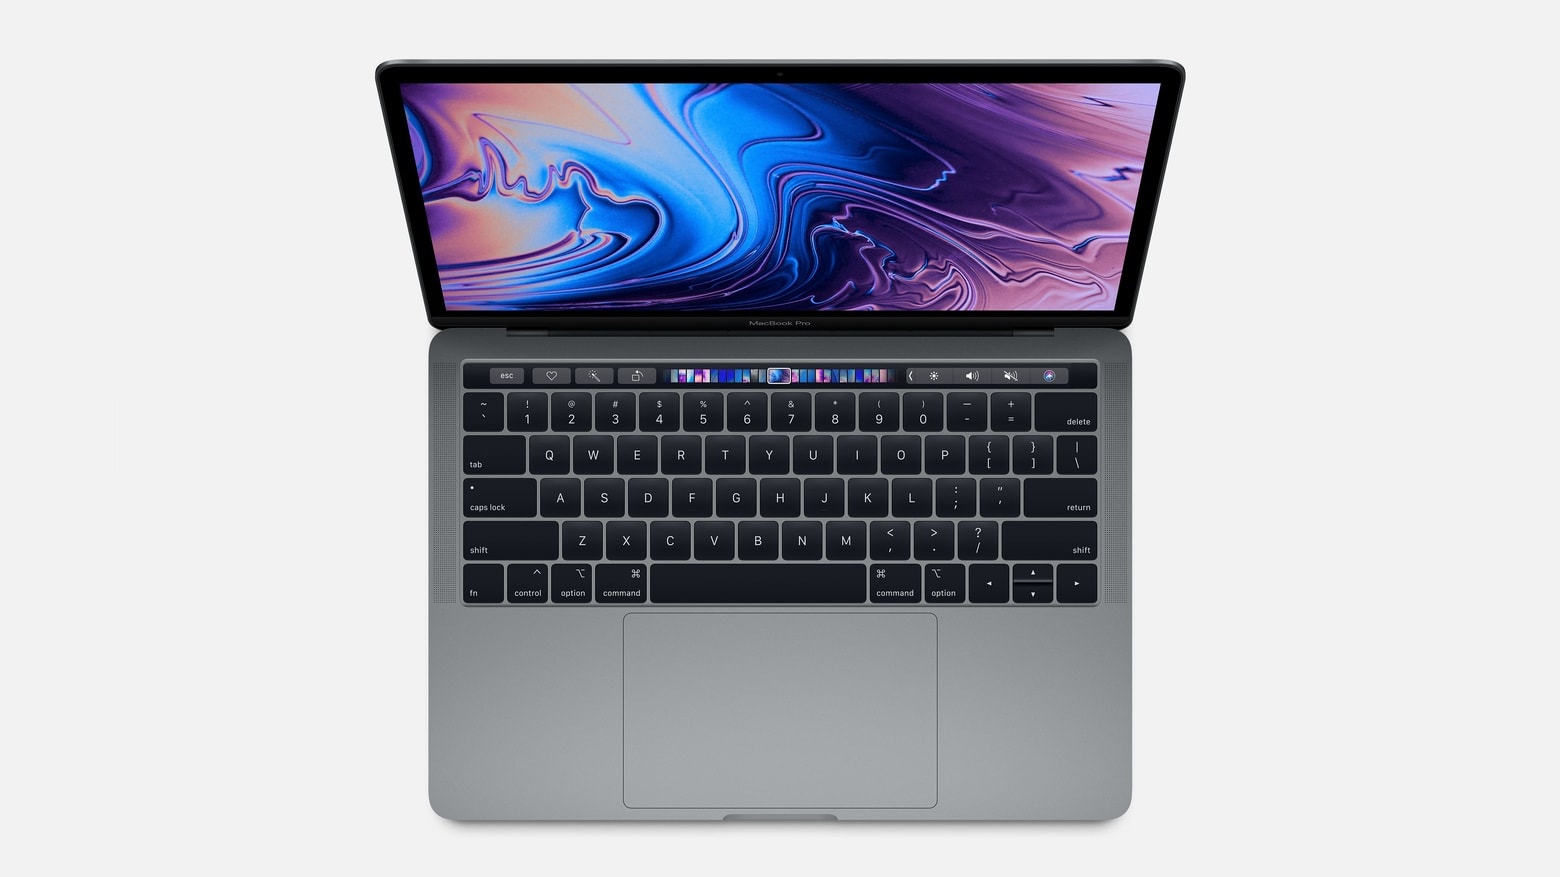 13-inch MacBook Pro from 2019